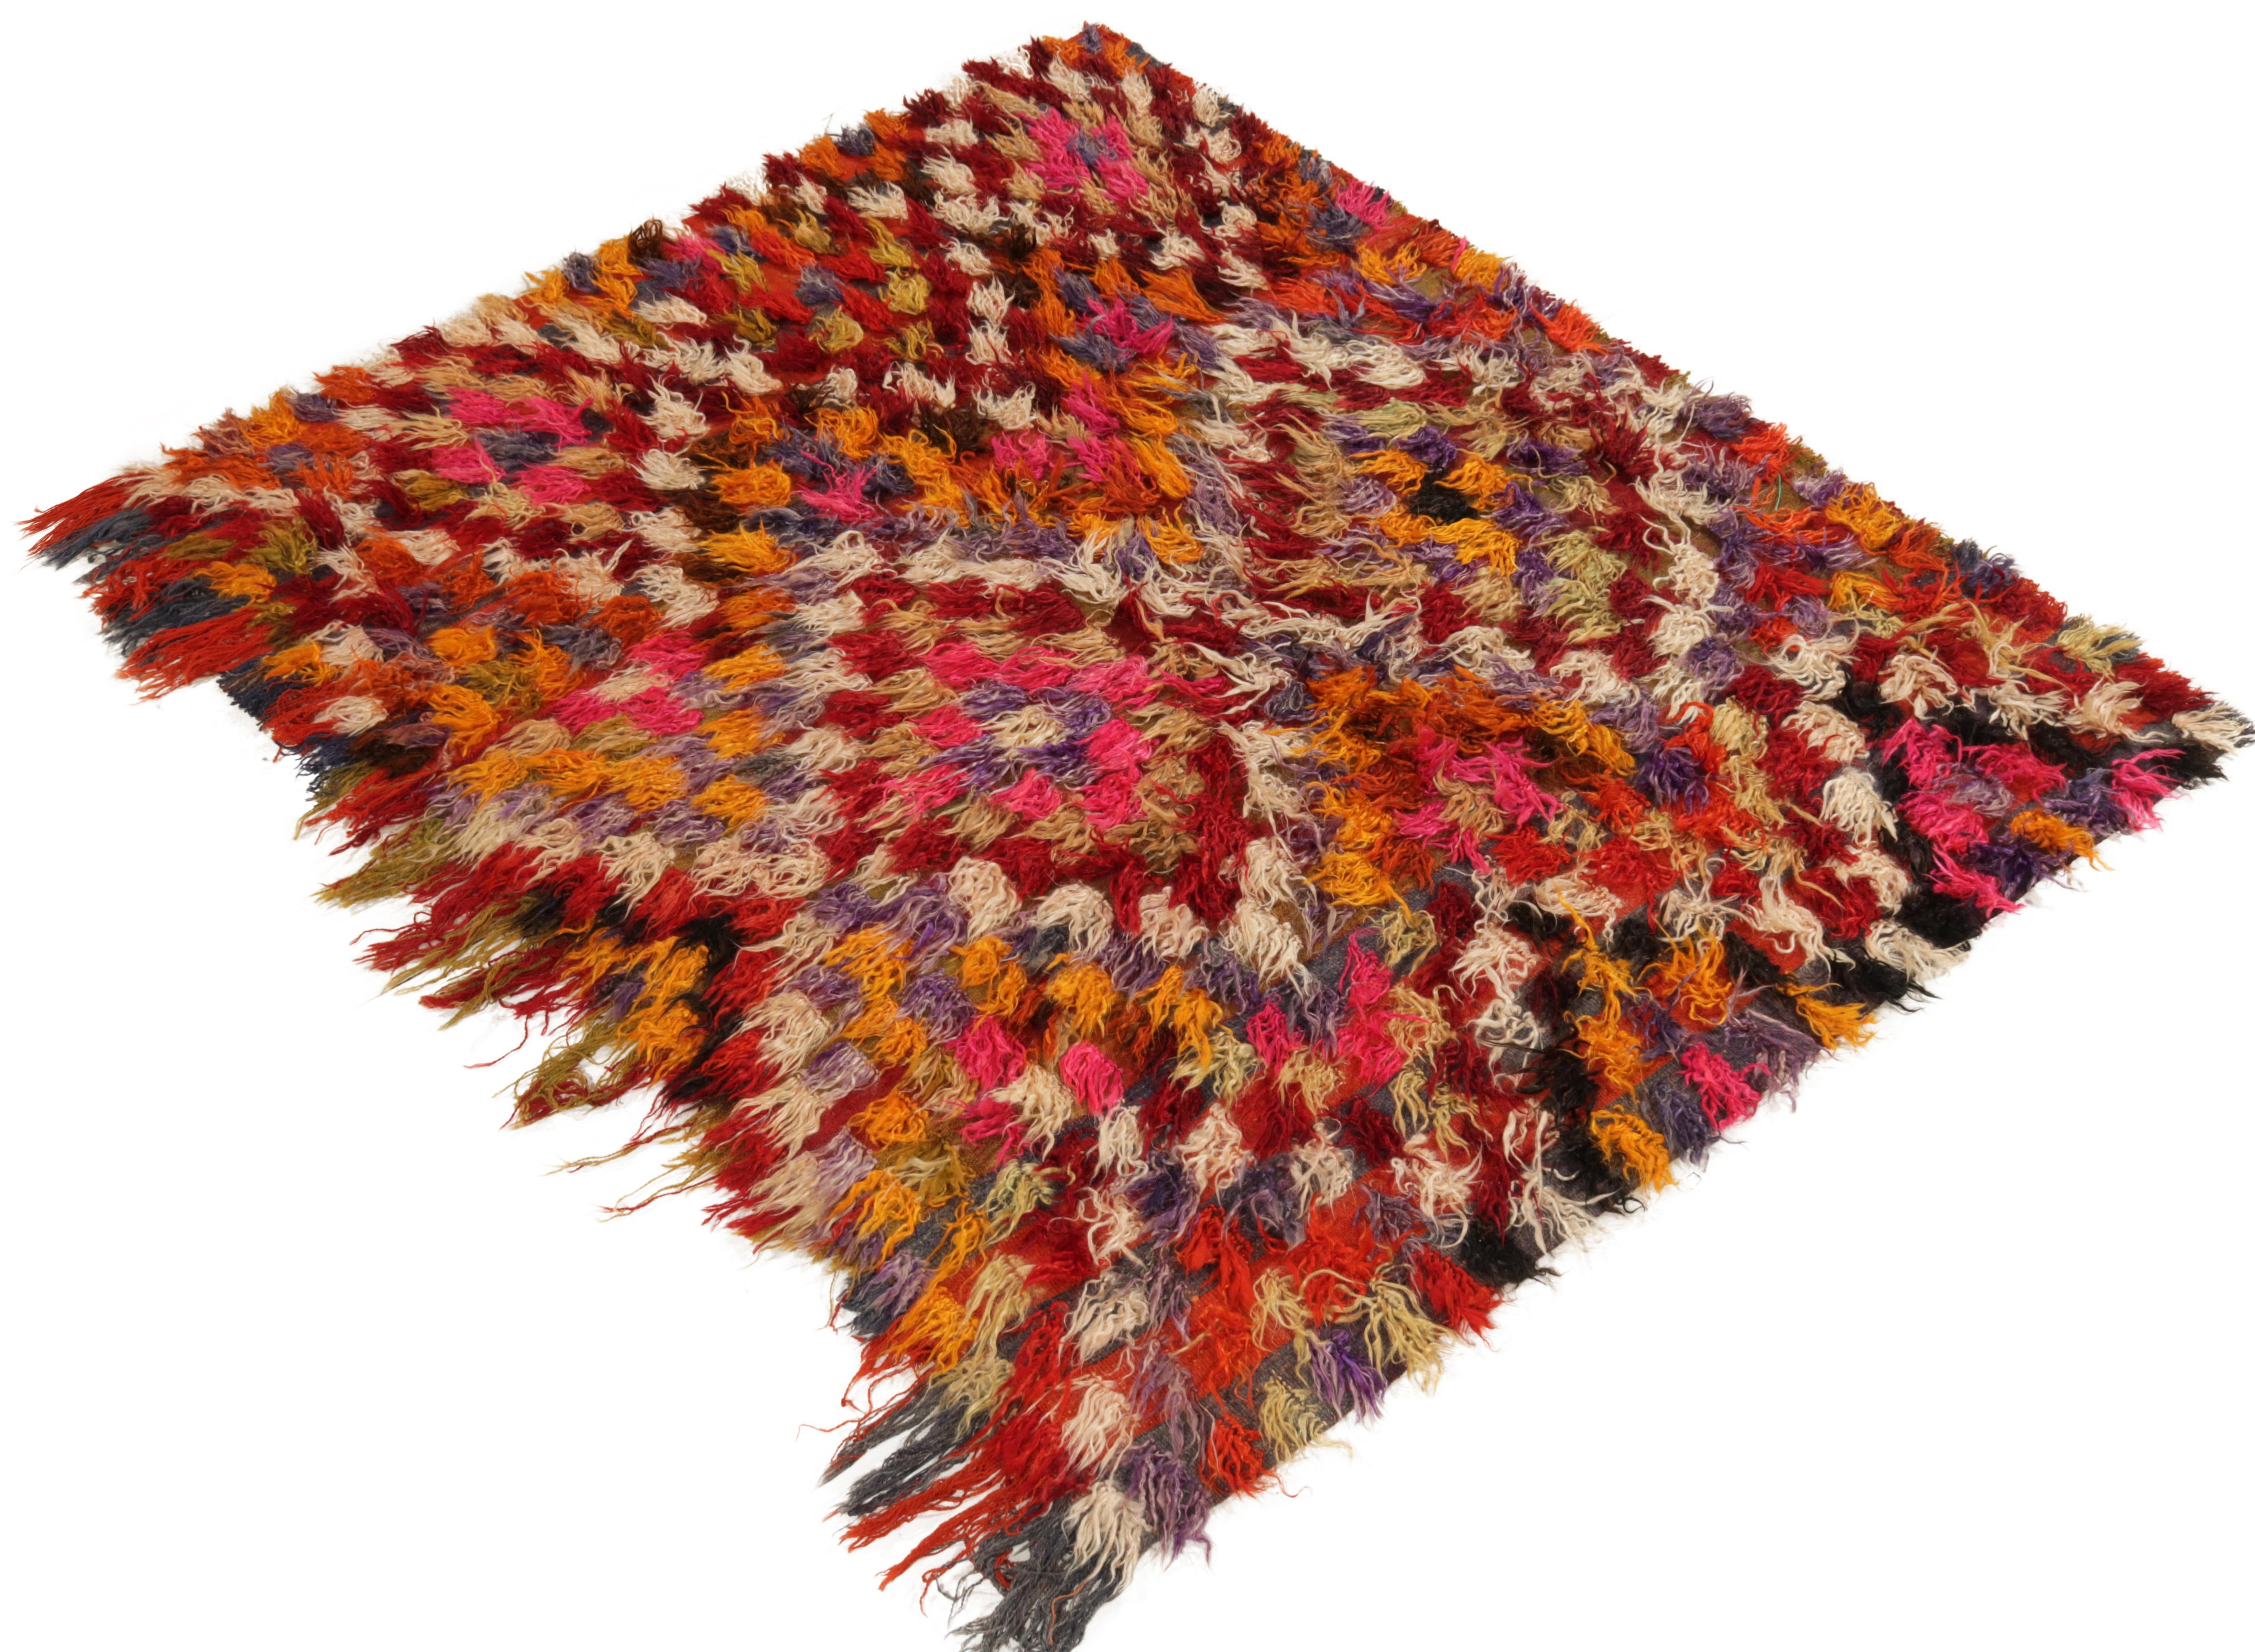 From Rug & Kilim’s Vintage selections, a hand-knotted mid-century Tulu rug carrying a luscious high pile. 

Originating from Turkey circa 1950-1960, the rug employs geometry to craft diamond patterns & chevrons in hues of red, orange, yellow,